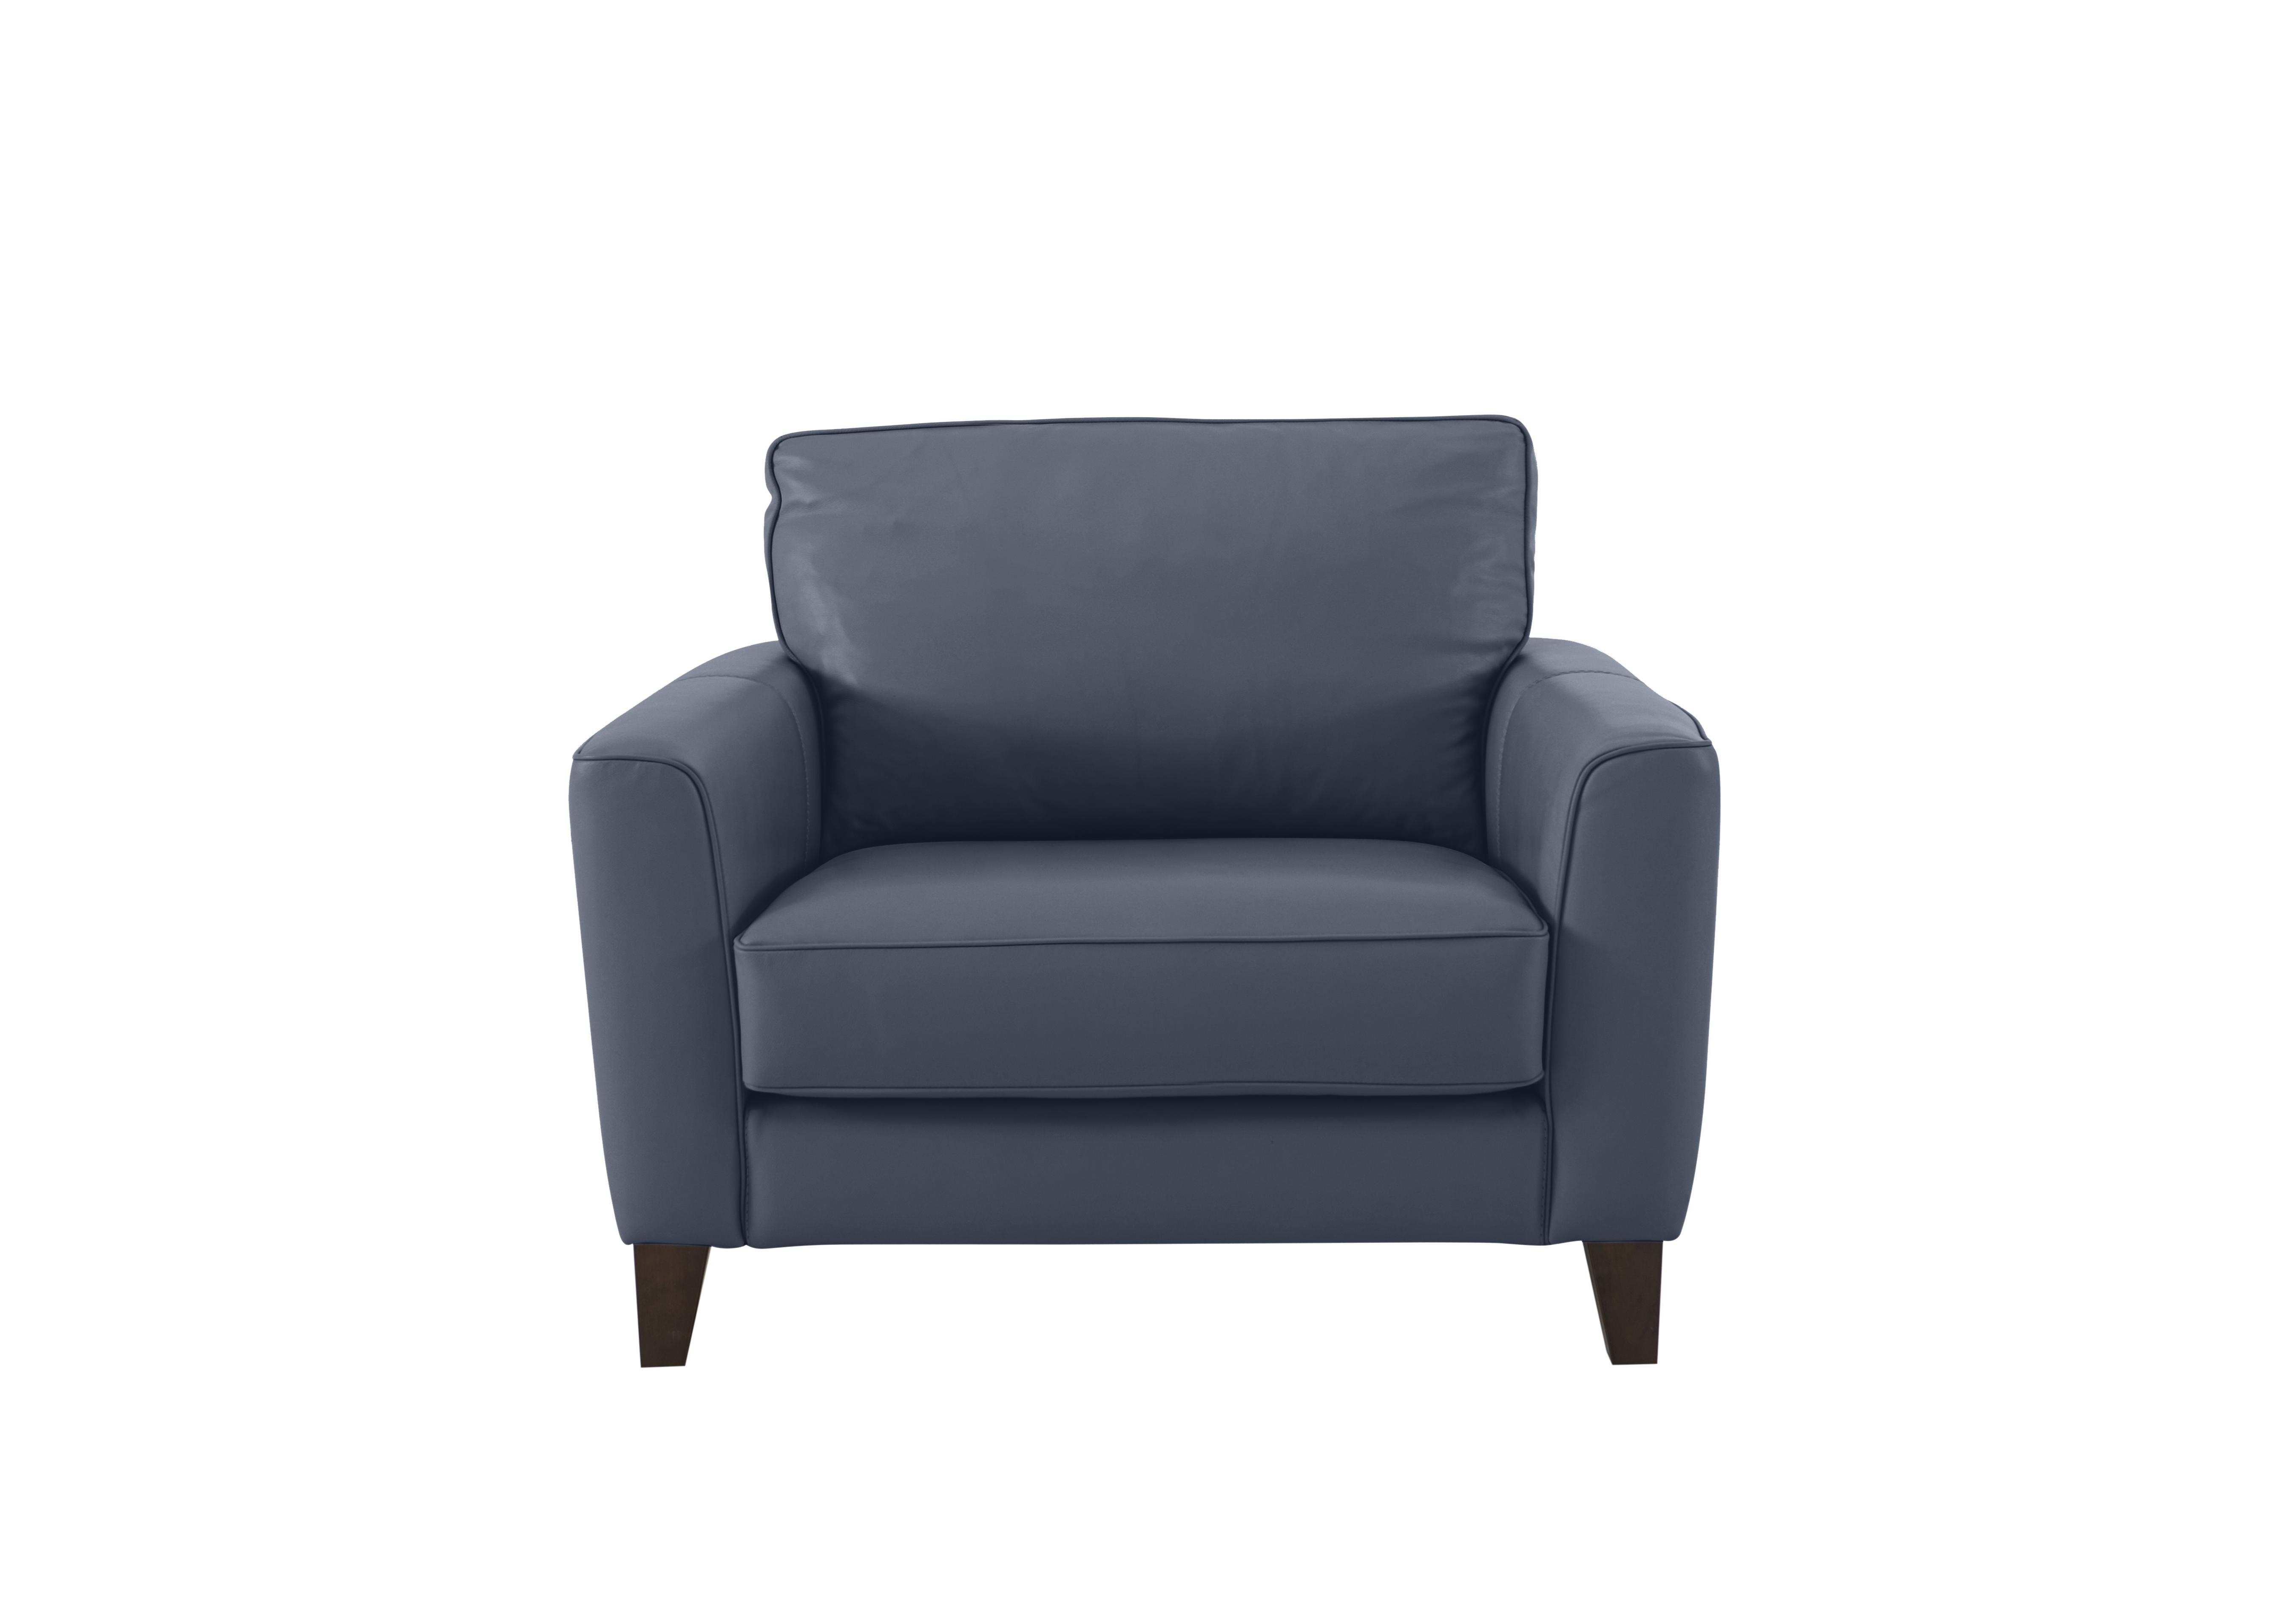 Brondby Leather Cuddle Chair in Bv-313e Ocean Blue on Furniture Village